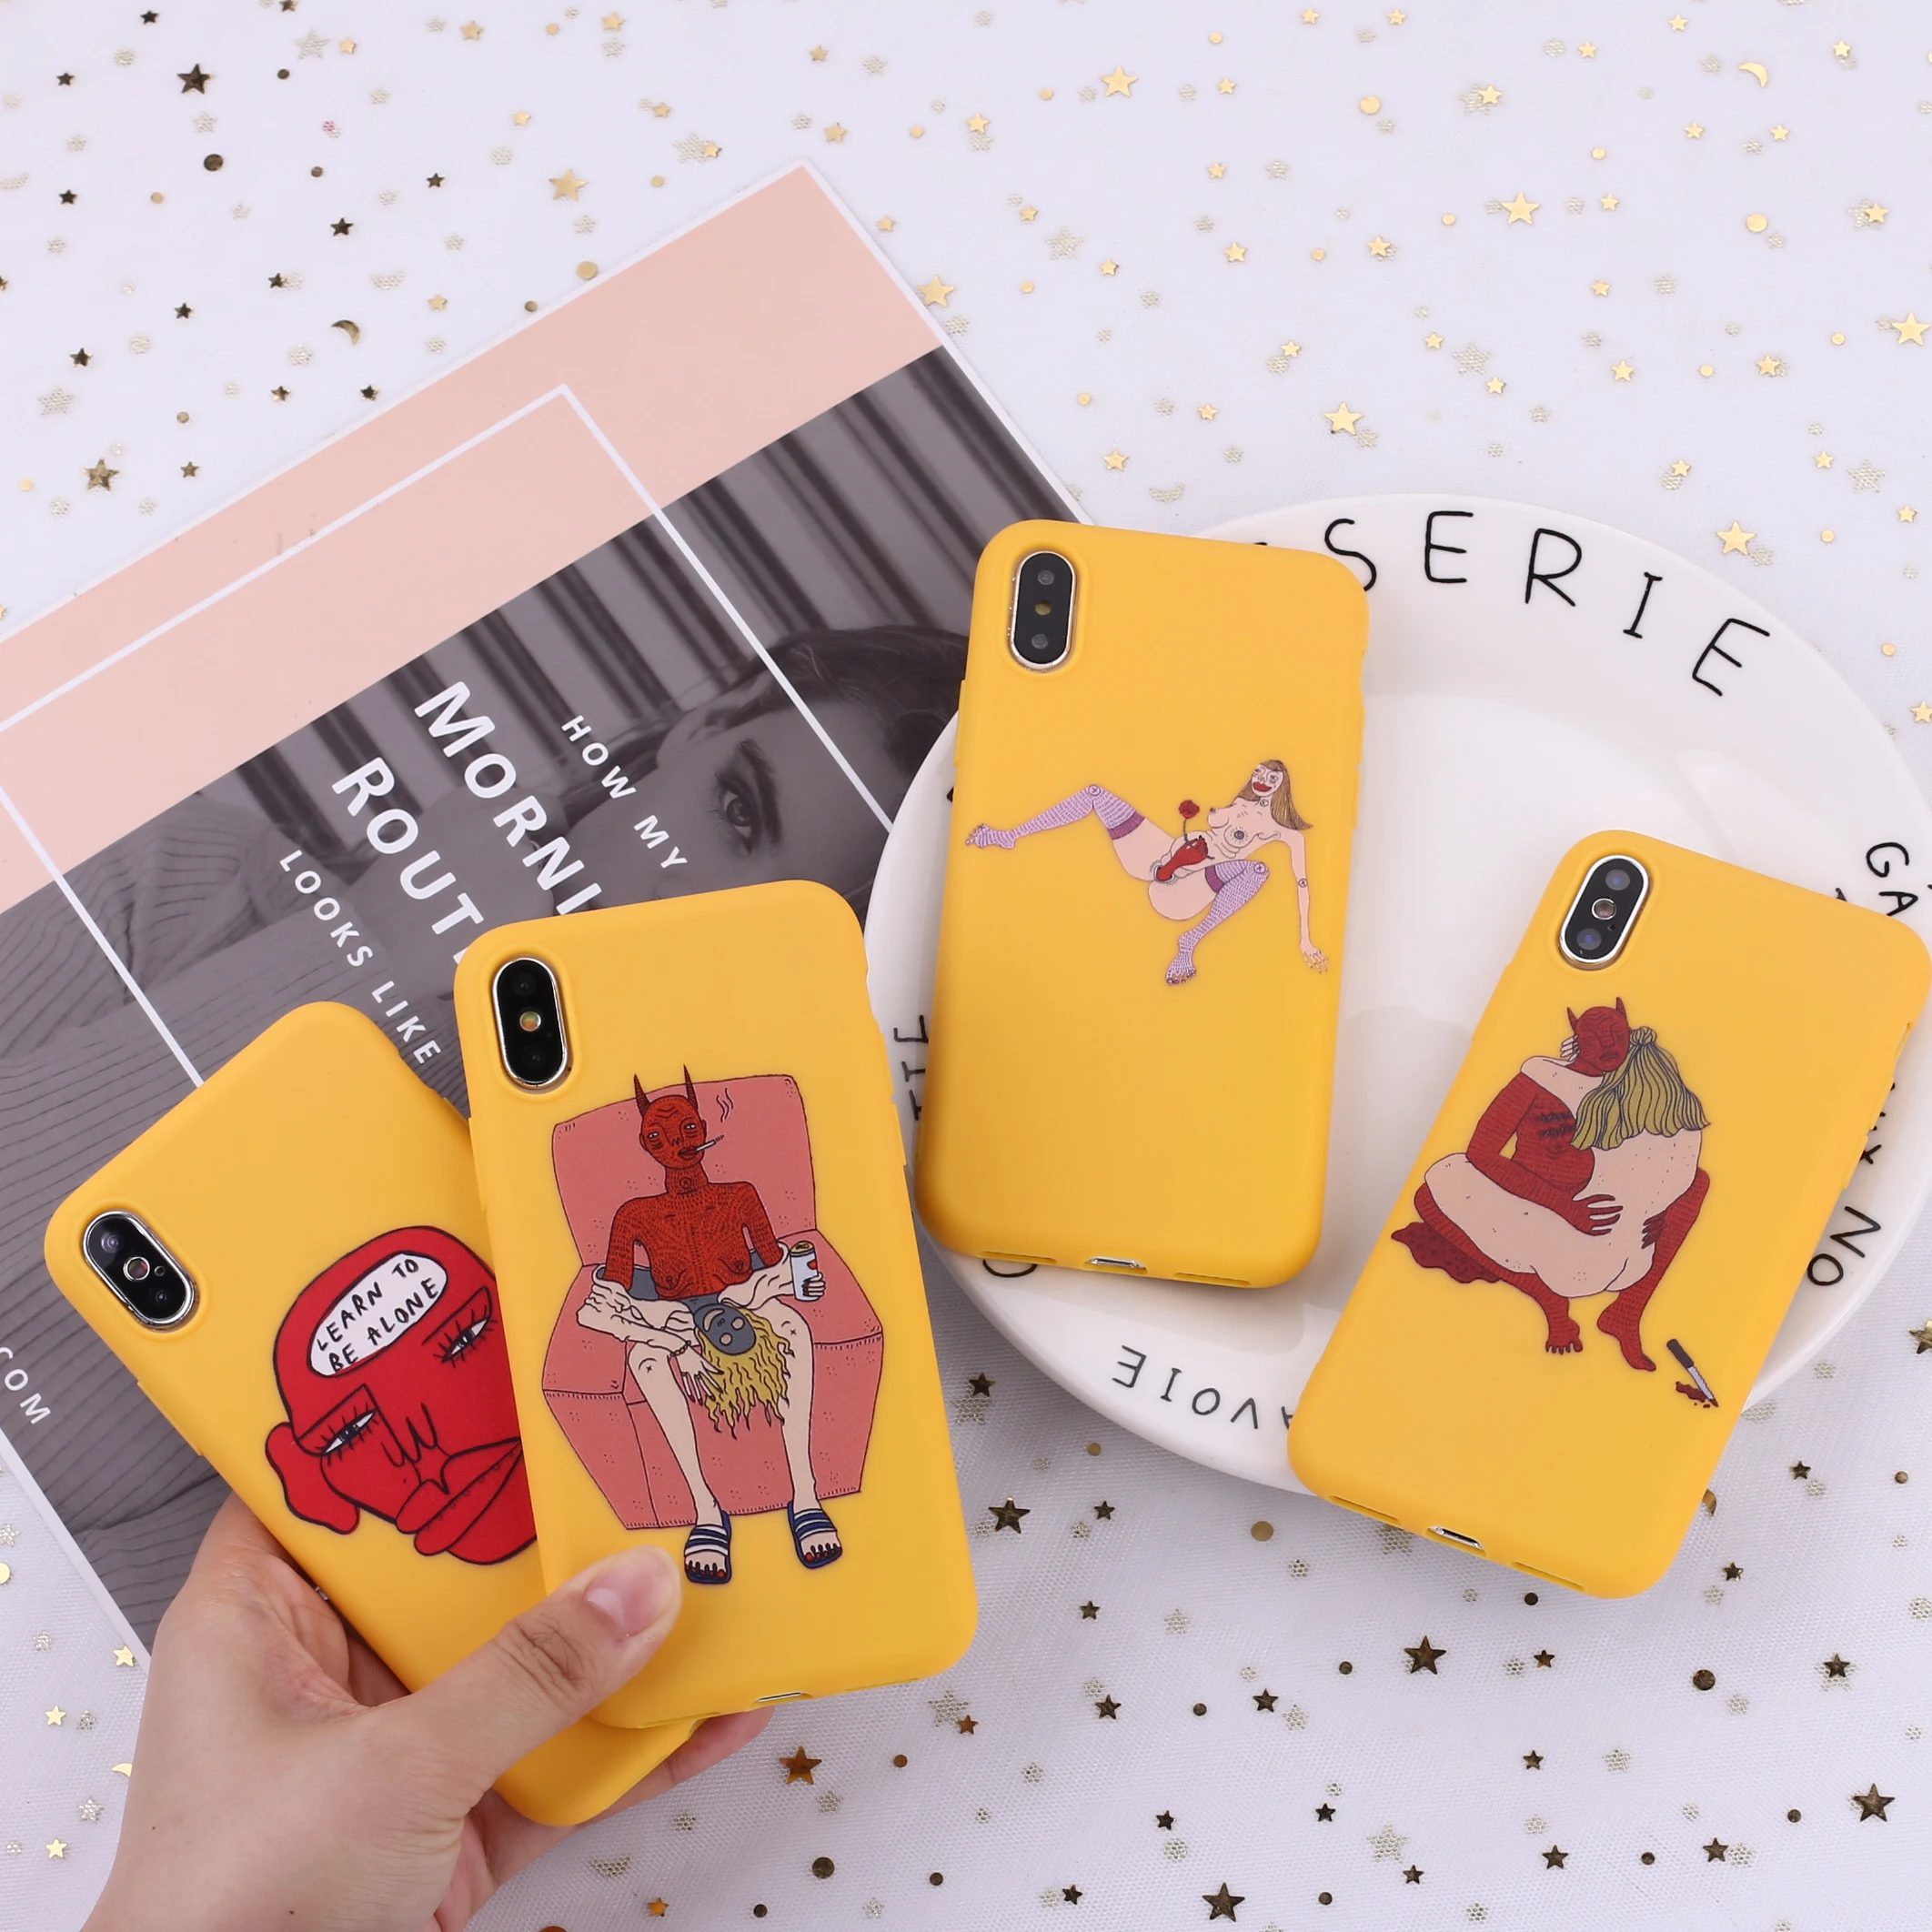 

Yellow Lover Art Soft Silicone Candy Case Fundas Cover For iPhone 13 12 Mini 11 Pro 8 8Plus X XS Max 7 7Plus XR